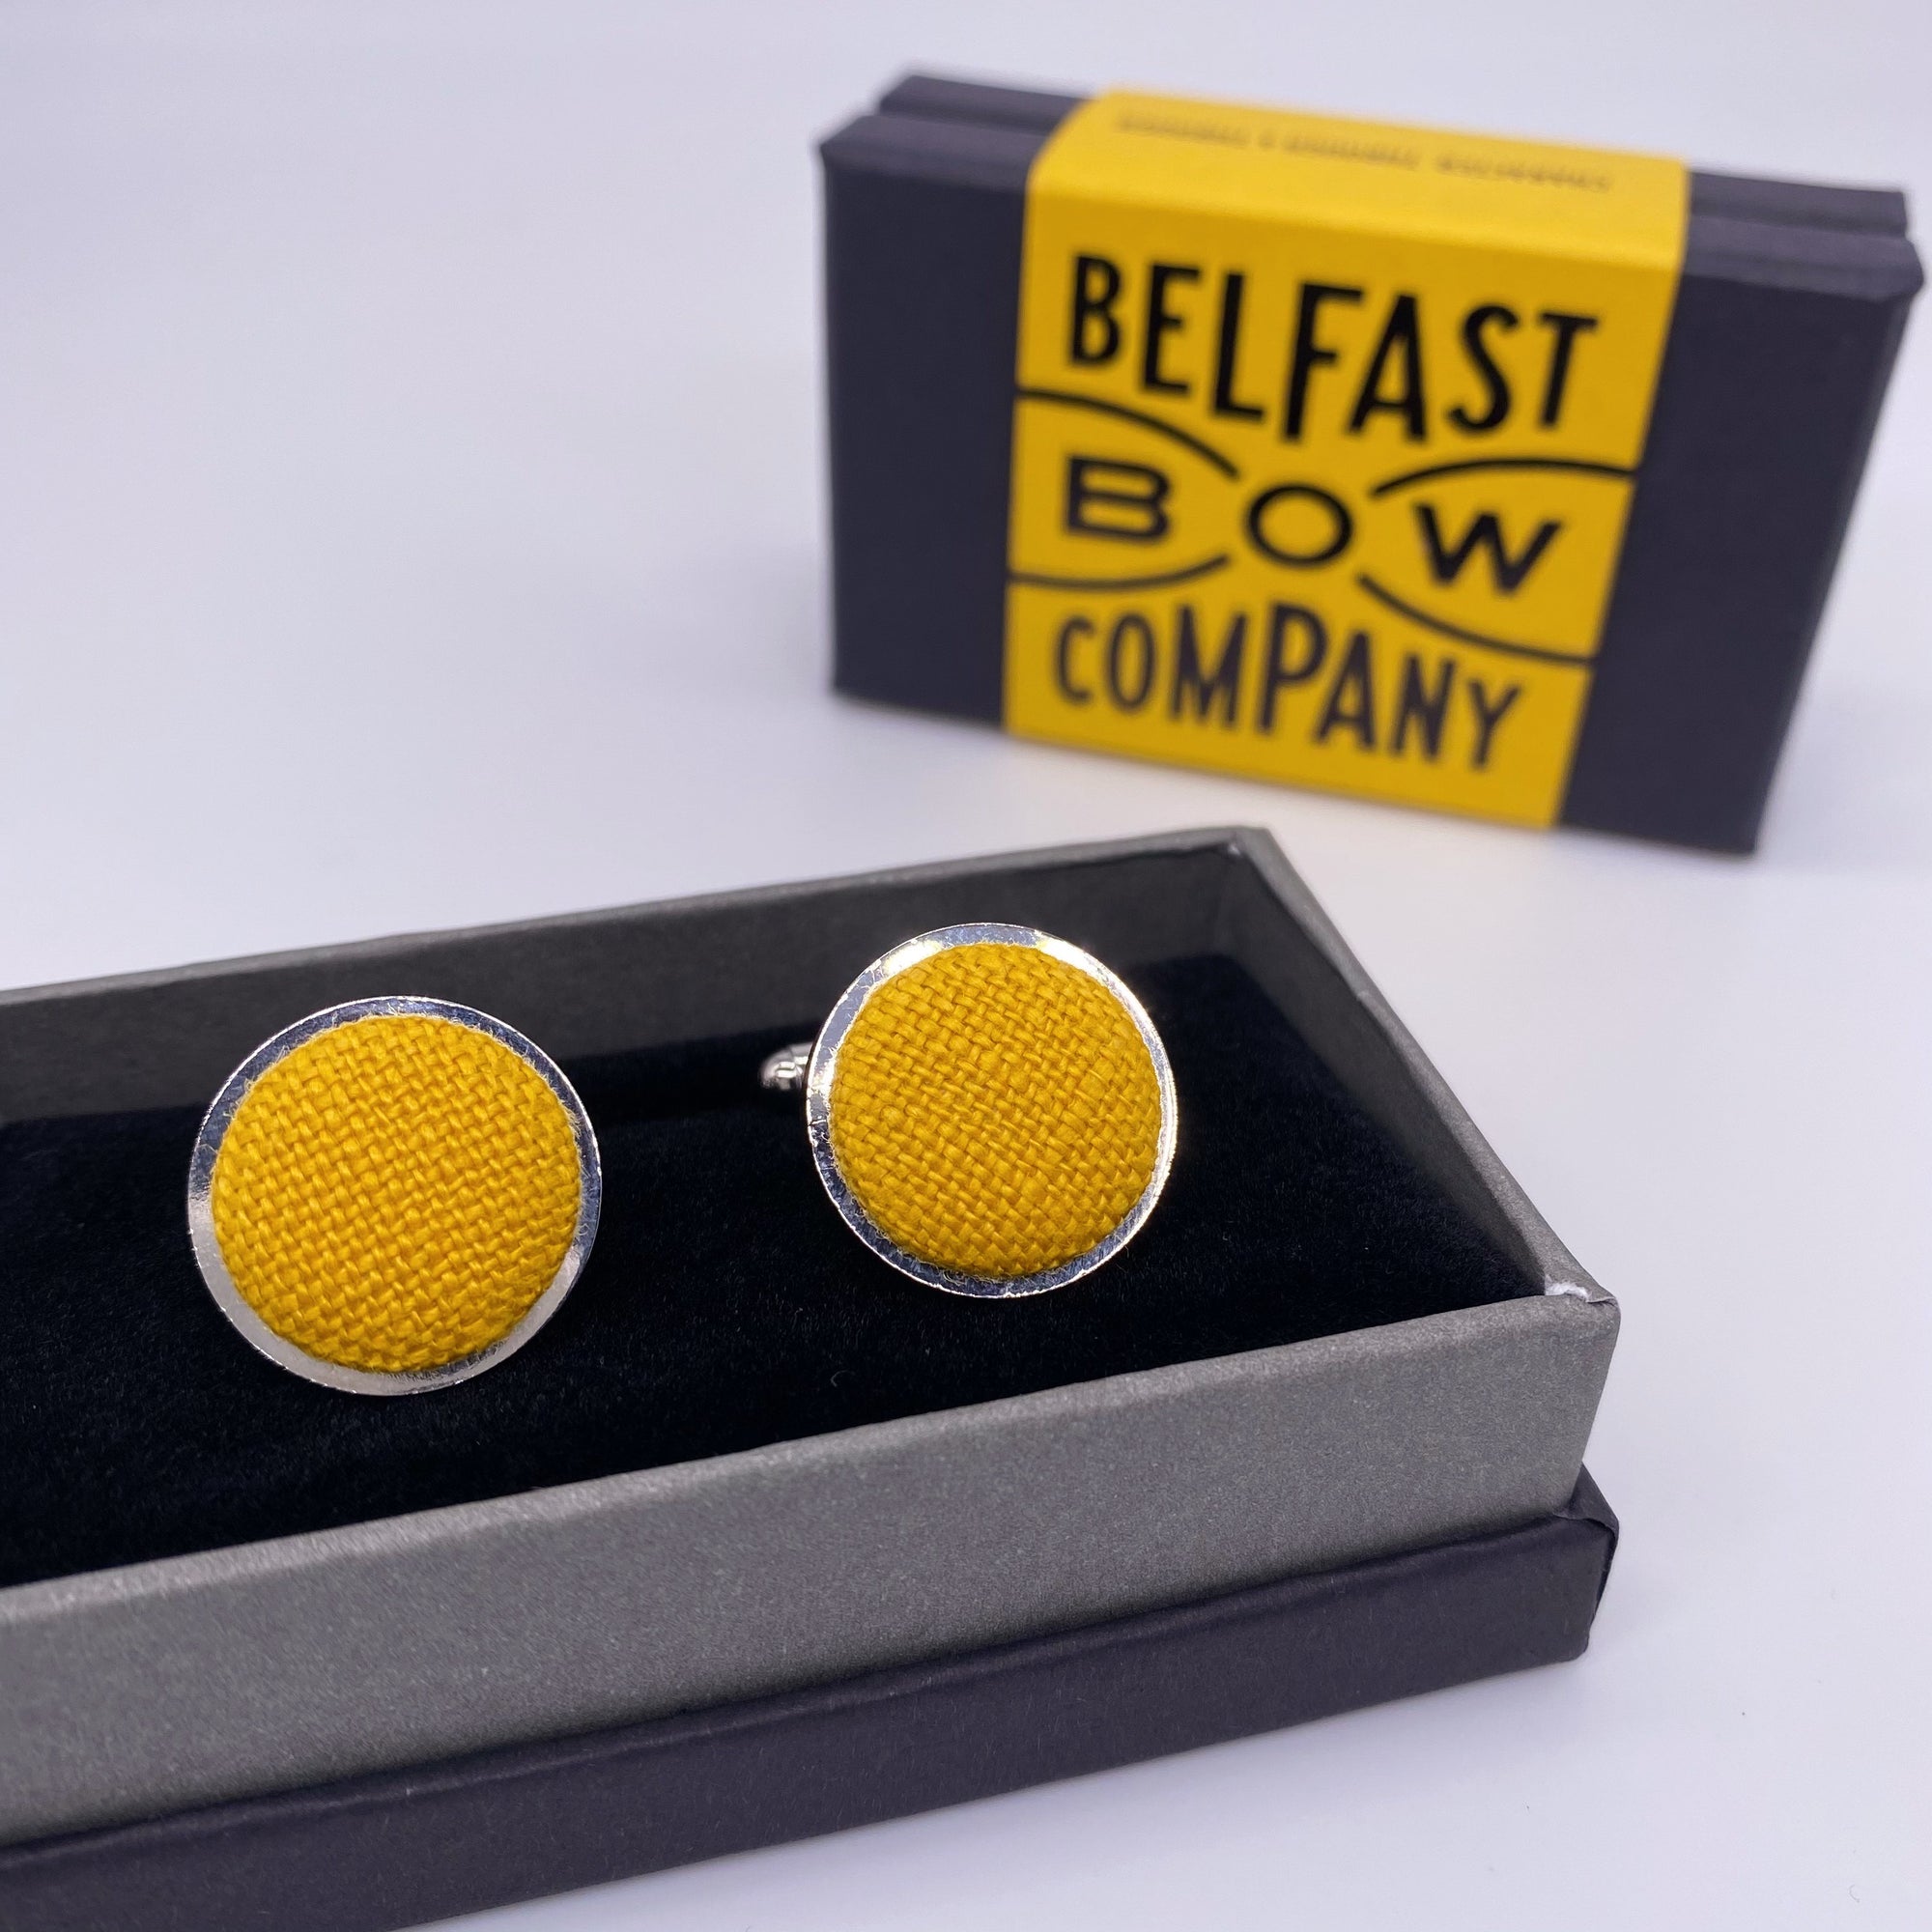 Irish Linen Cufflinks in Harland and Wolff Yellow by the Belfast Bow Company